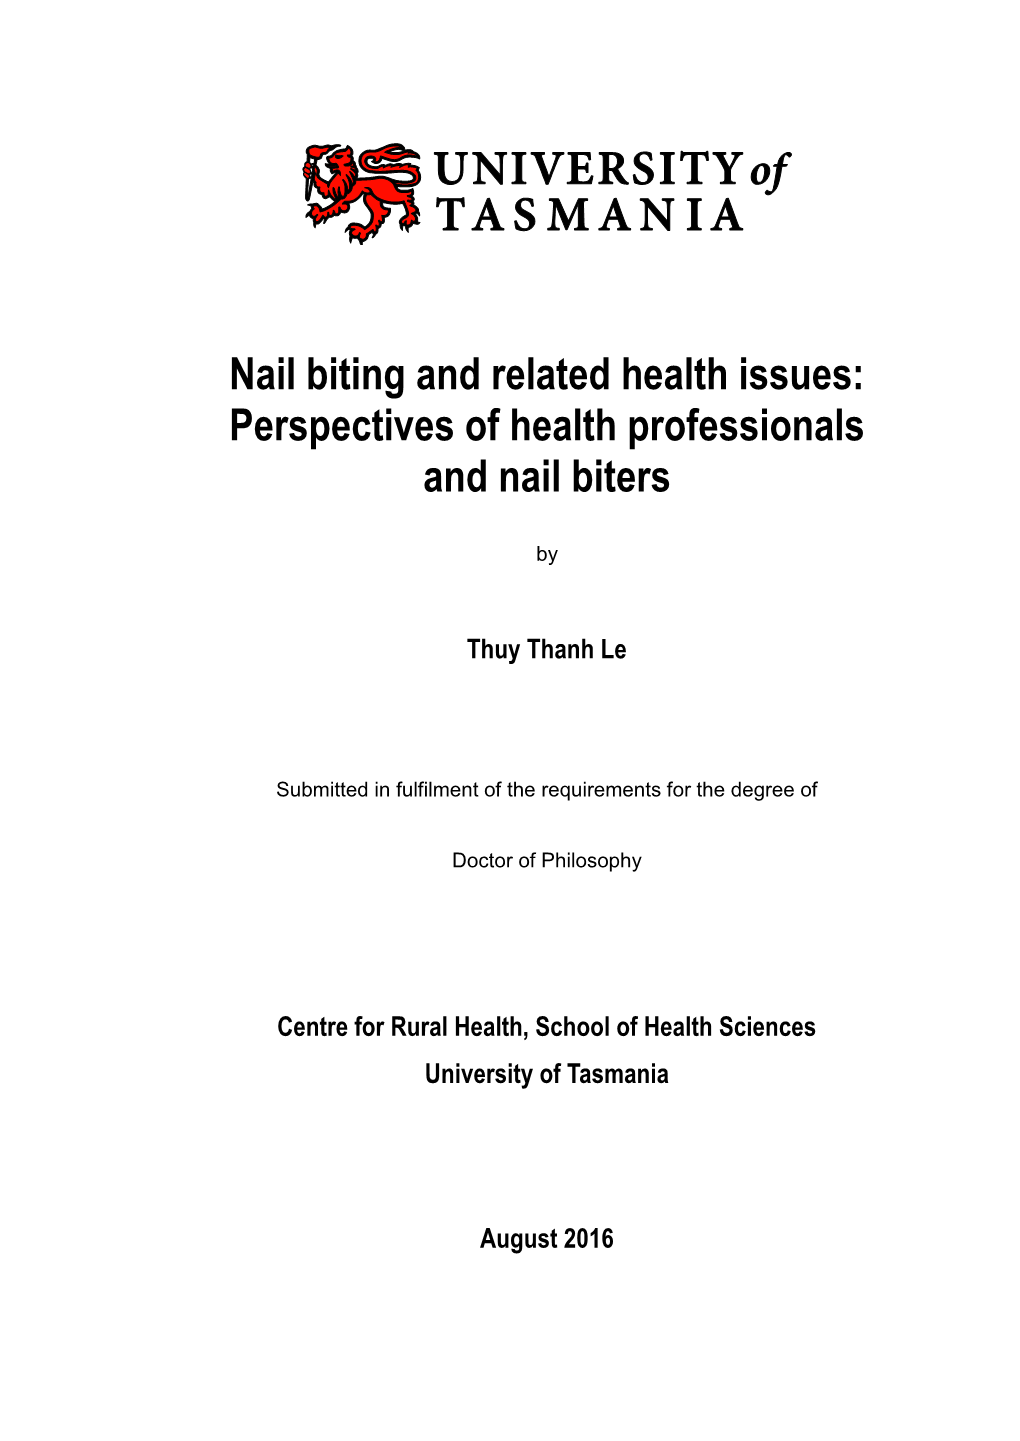 Nail Biting and Related Health Issues: Perspectives of Health Professionals and Nail Biters